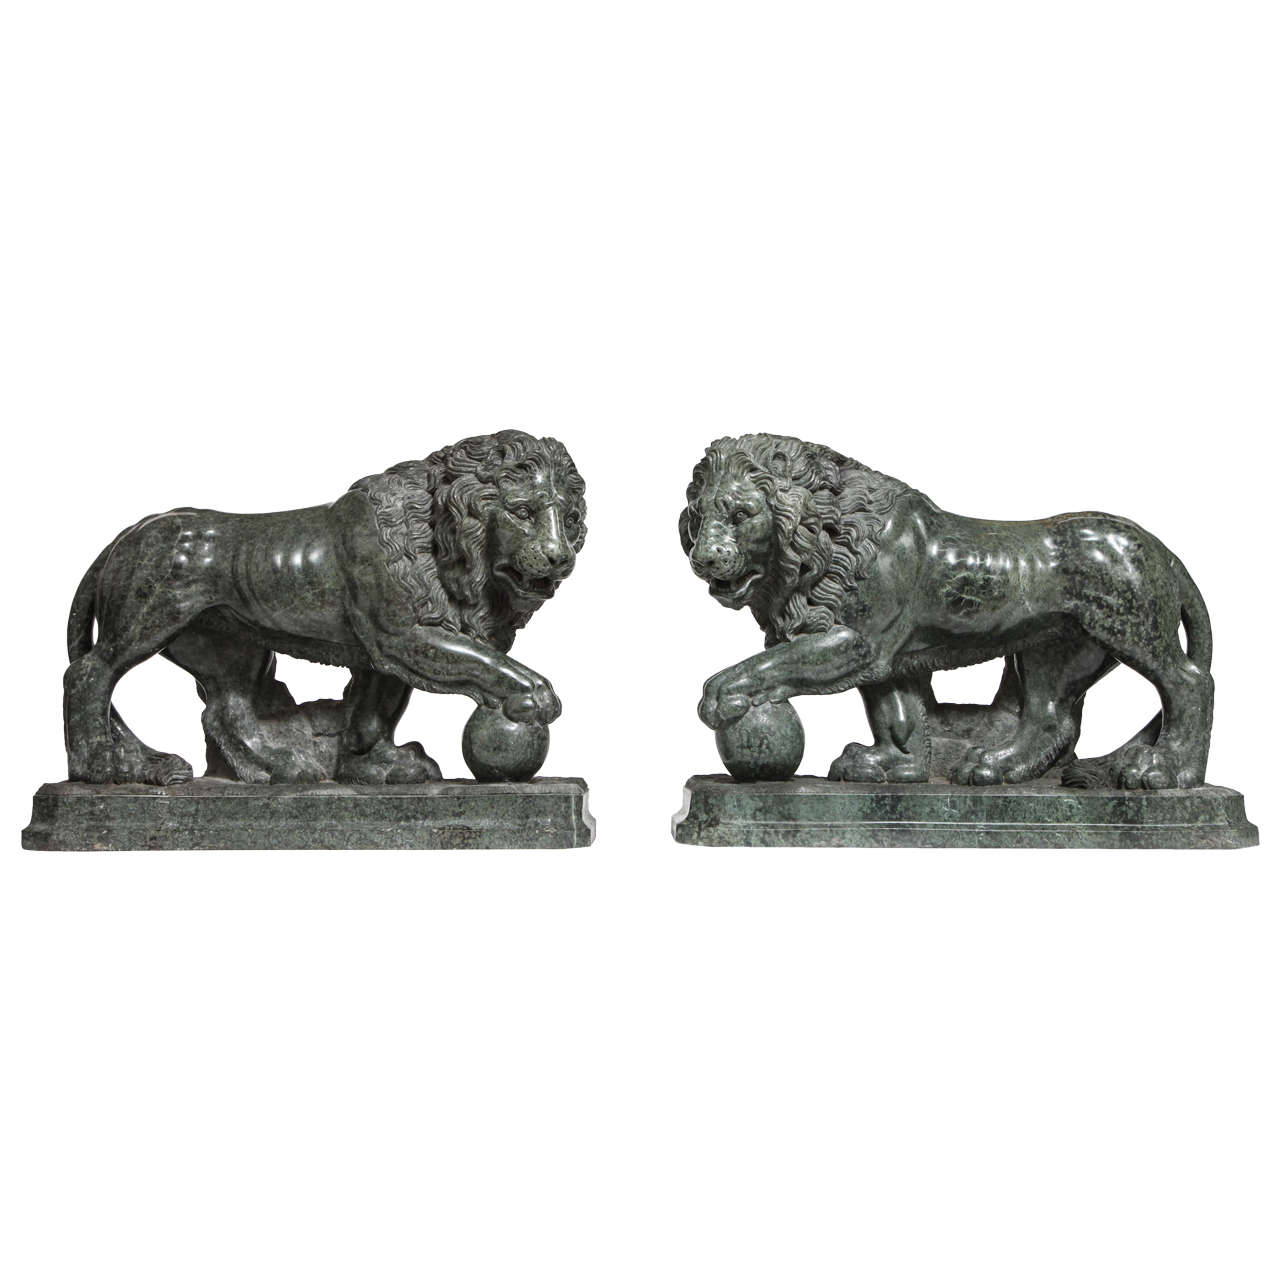 Pair of Large Verde Antico Marble Lions with Orbs by Pietro Simoni Da Barga